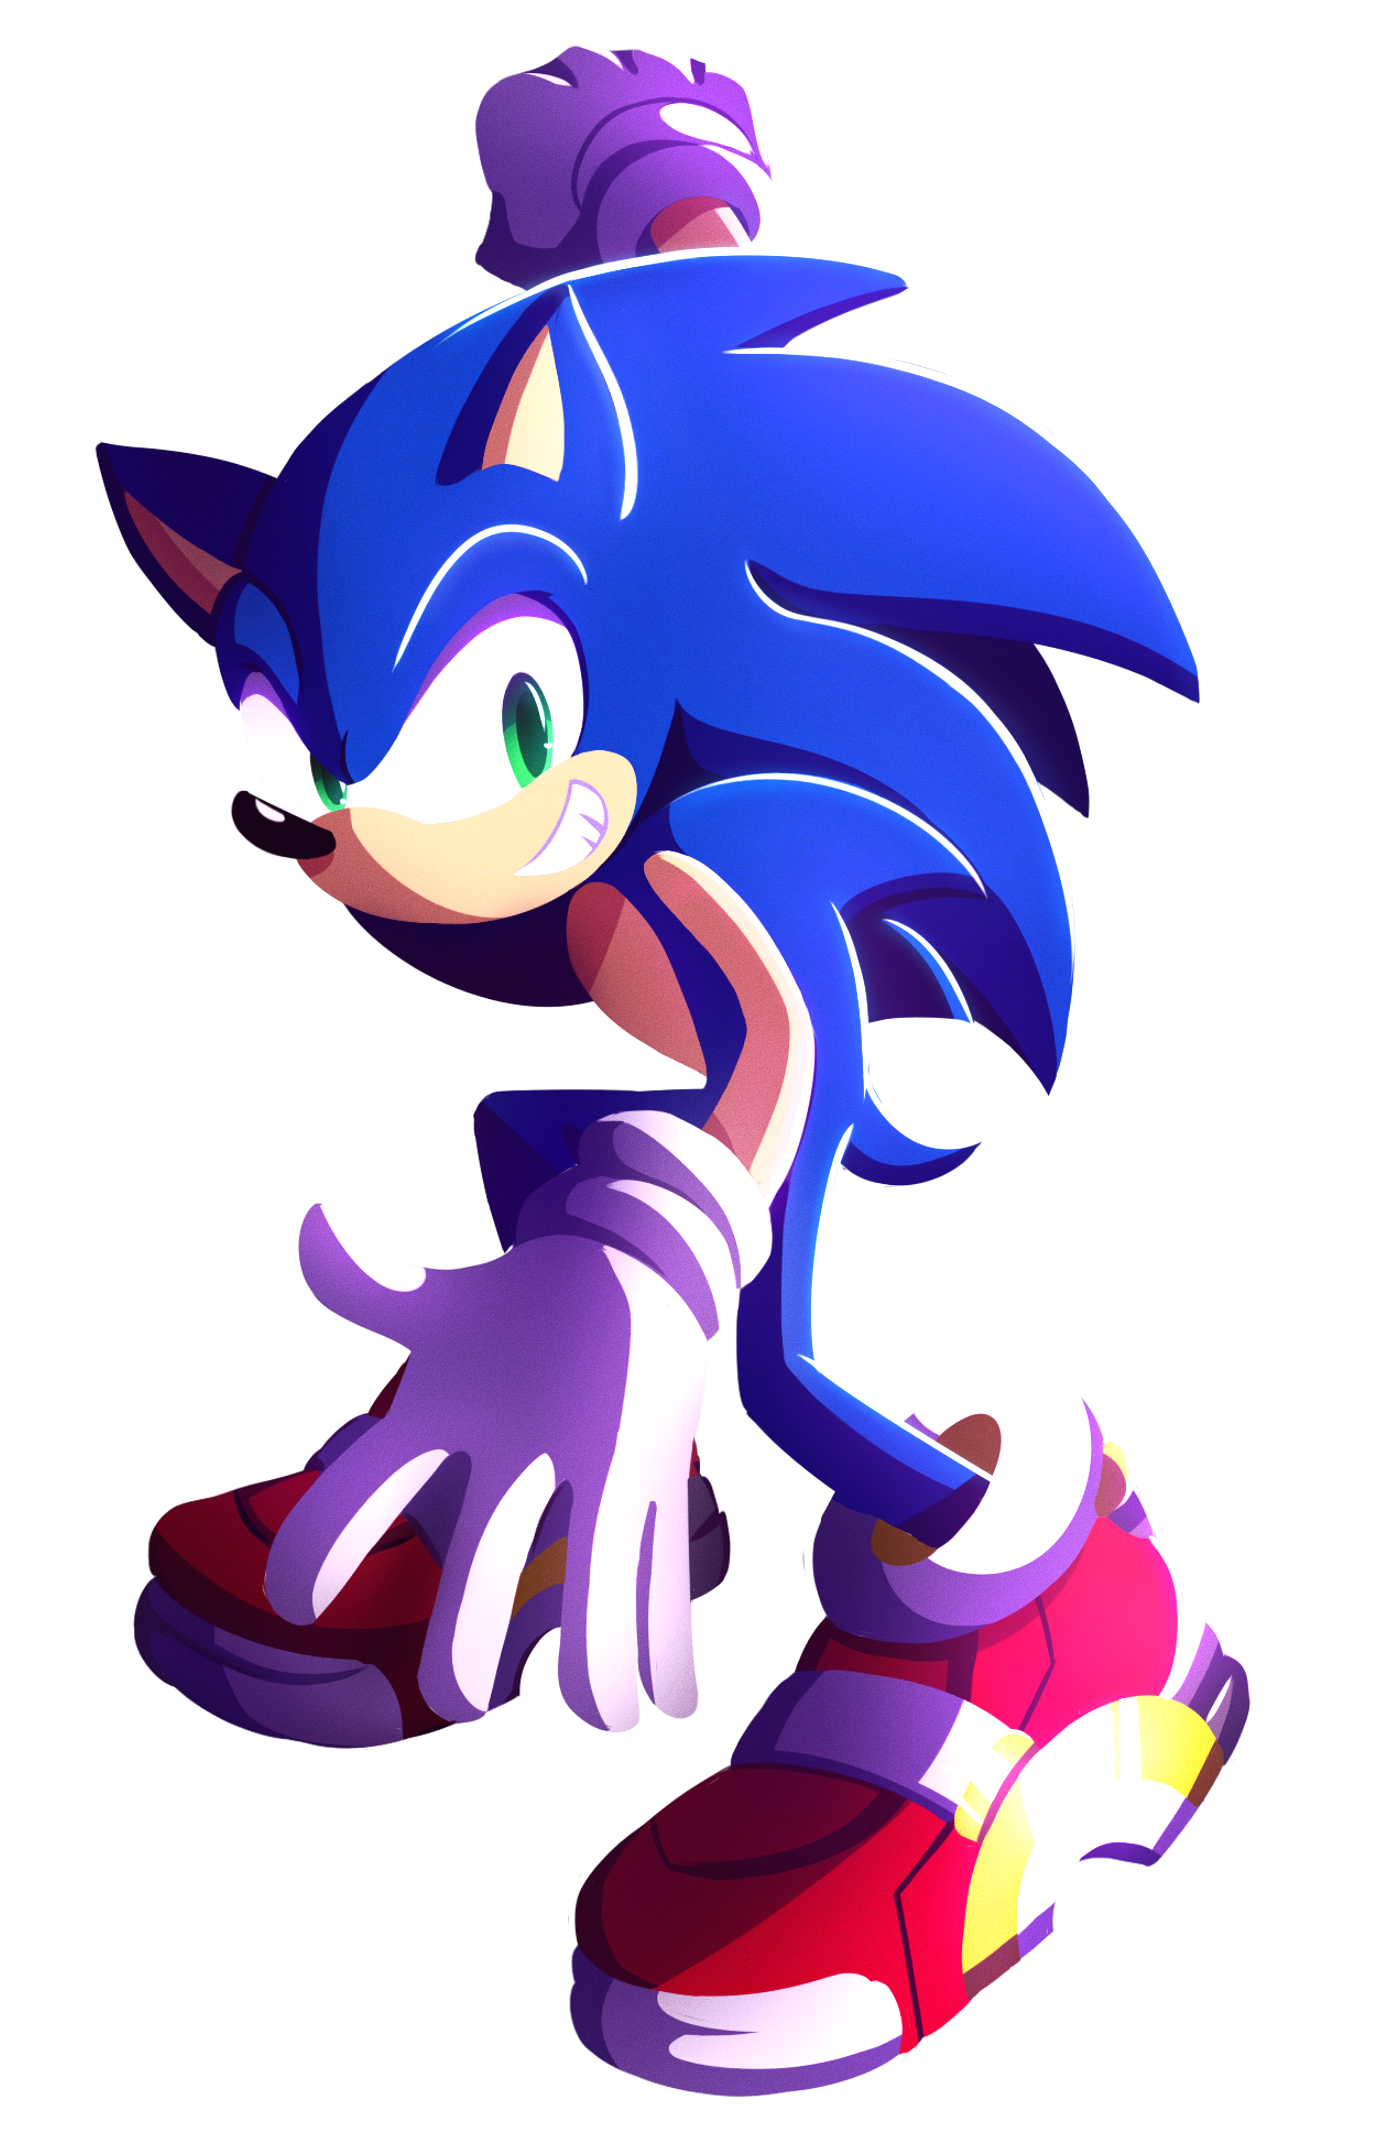 Wender Comm Closed on X: Just the Classic Sonic #Sonic #SonicTheHedgehog  #Sonicart #sonicartist #fanart #sonicfanart  / X